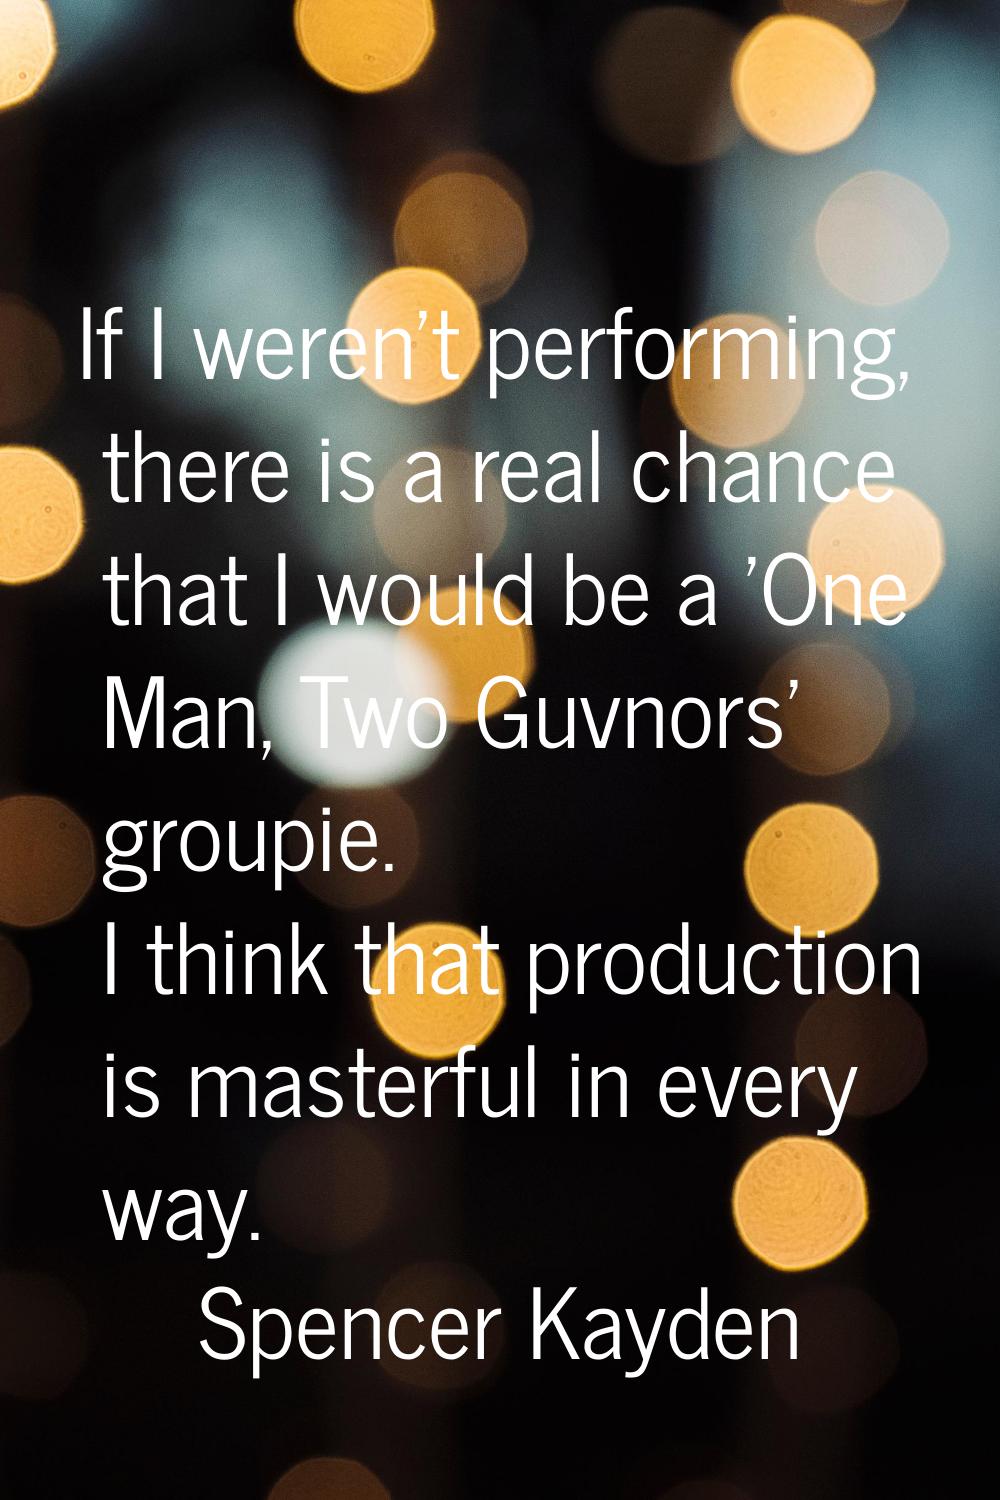 If I weren't performing, there is a real chance that I would be a 'One Man, Two Guvnors' groupie. I